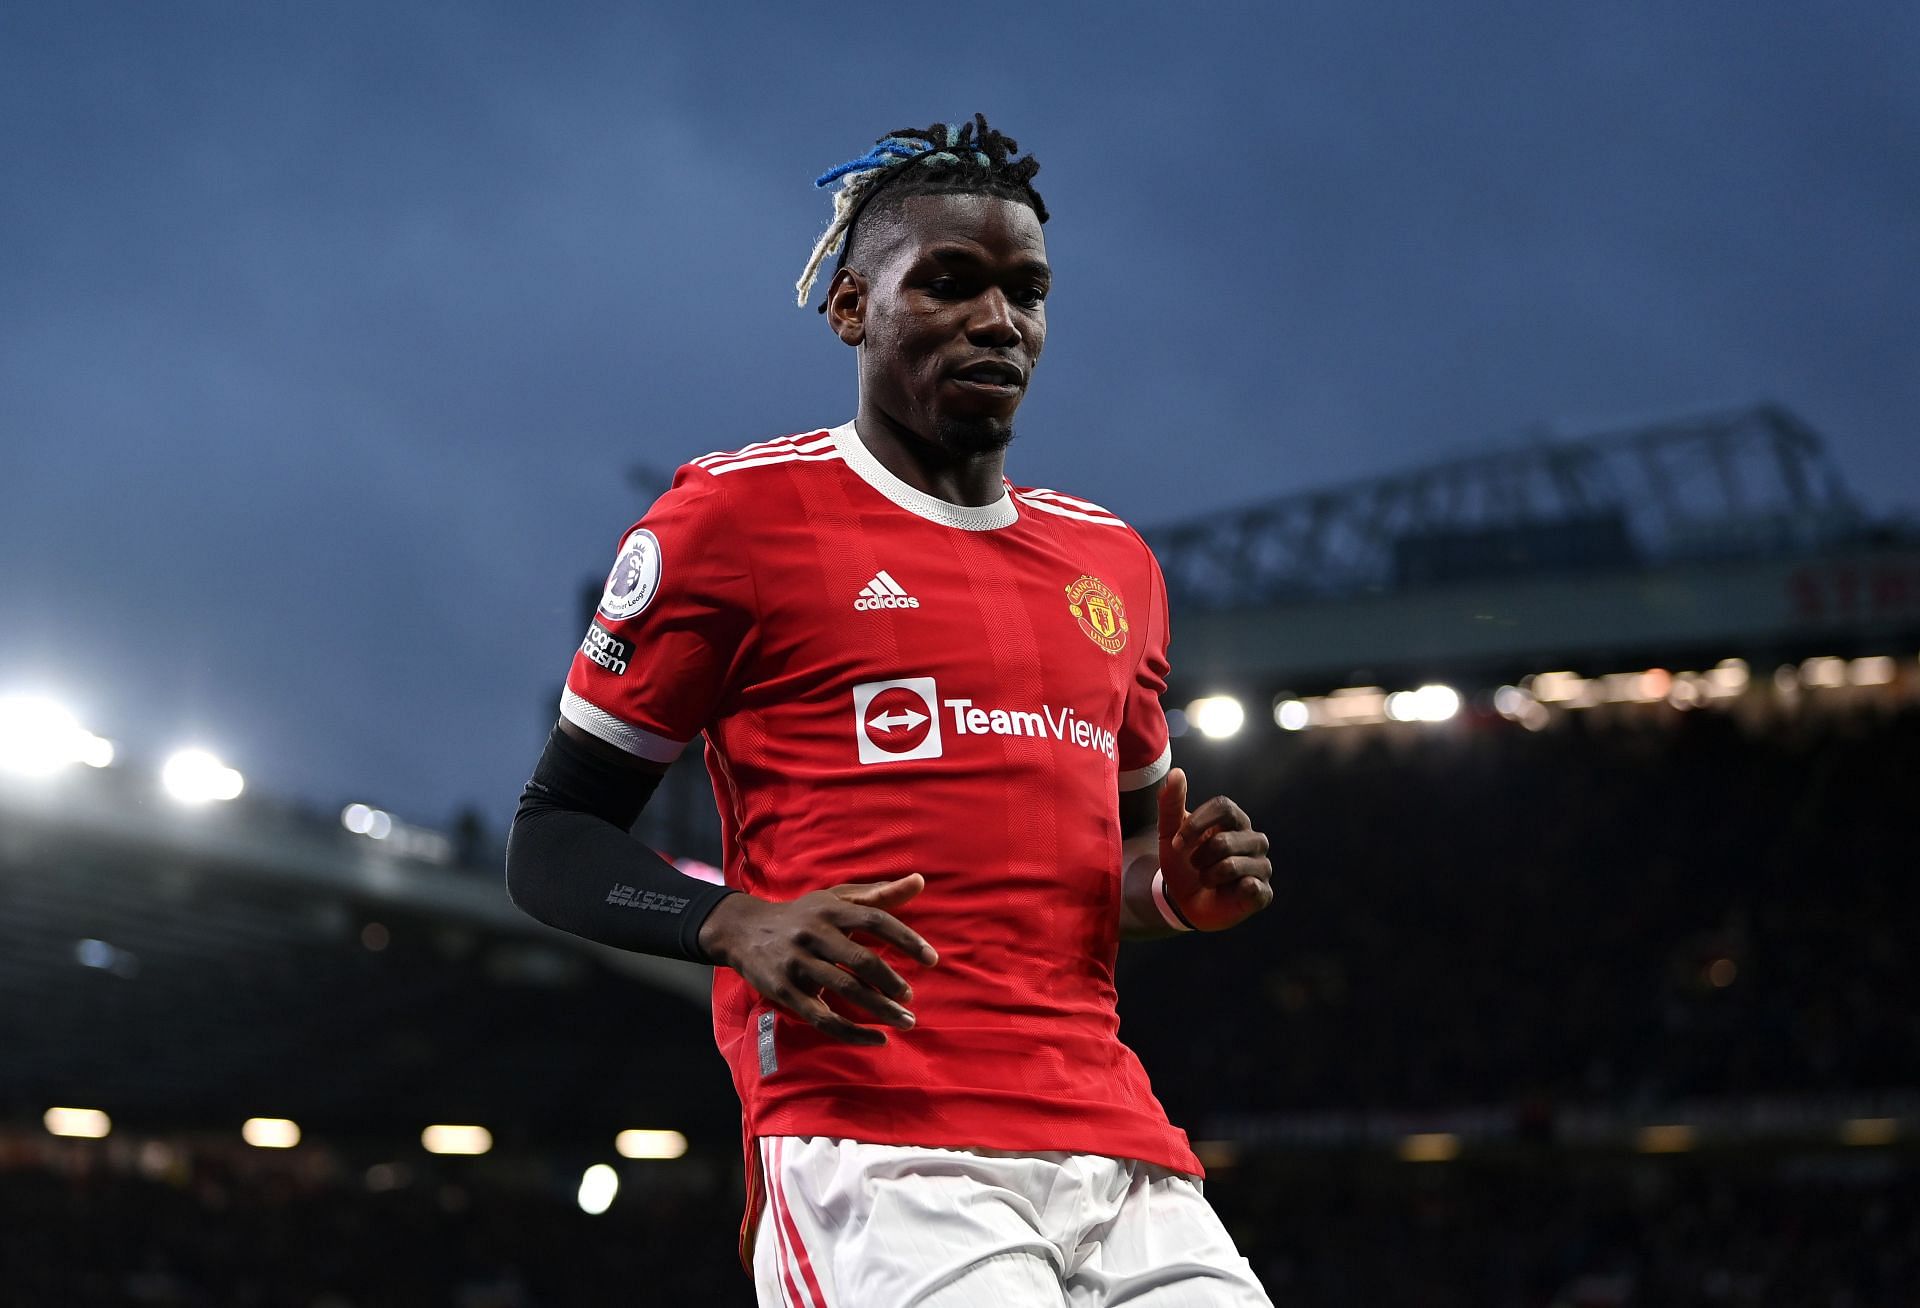 PSG have intensified their efforts to secure Paul Pogba.